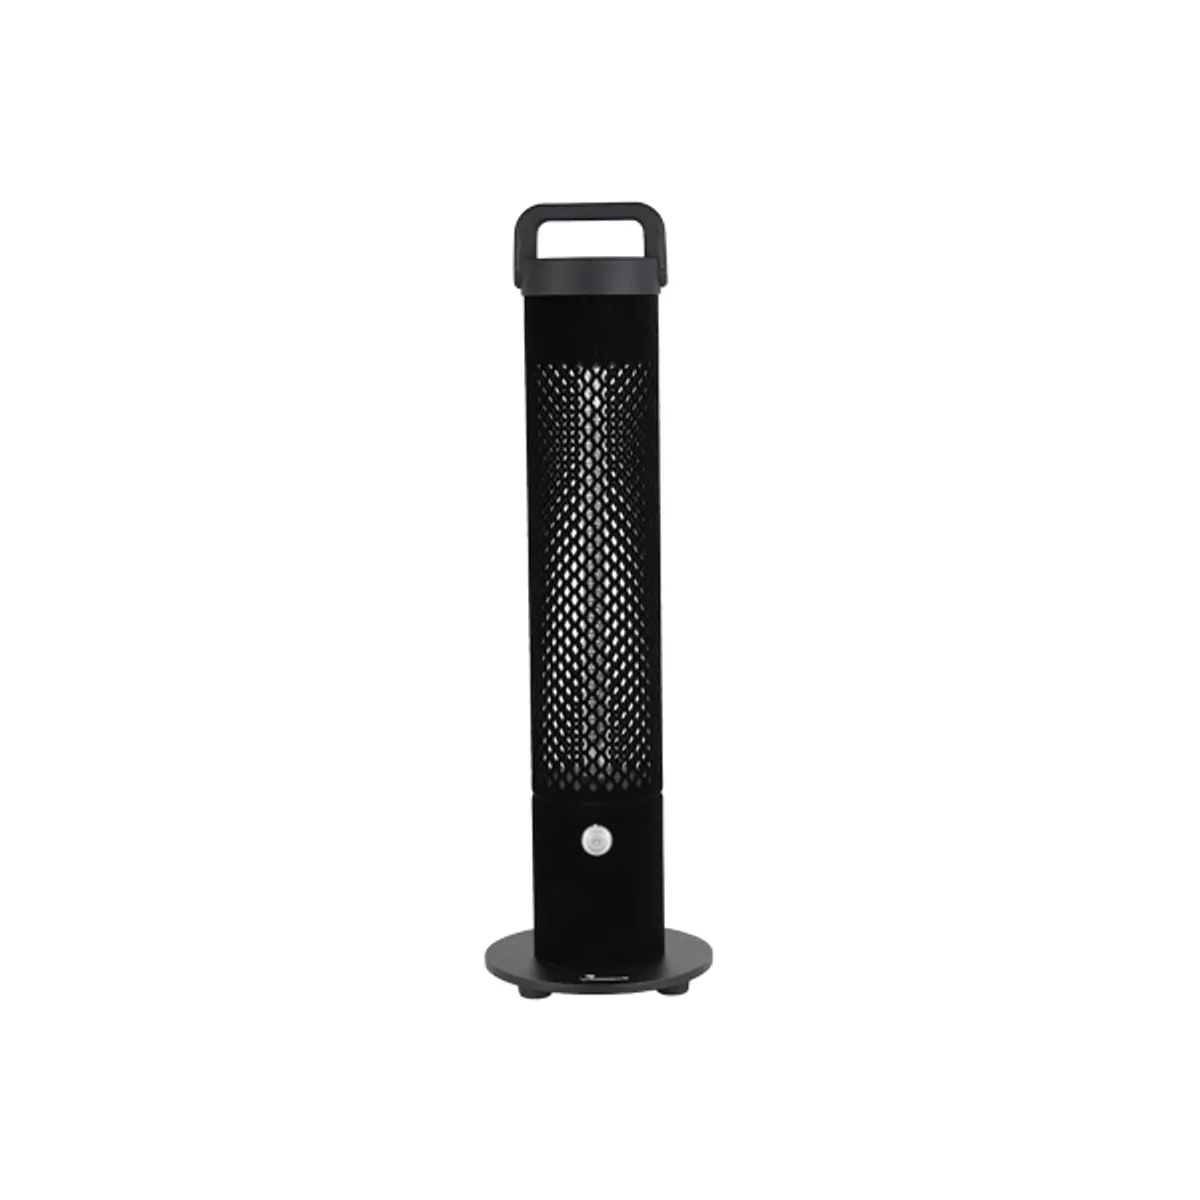 Surya Infrared floor standing heater Inside Out Contracts2